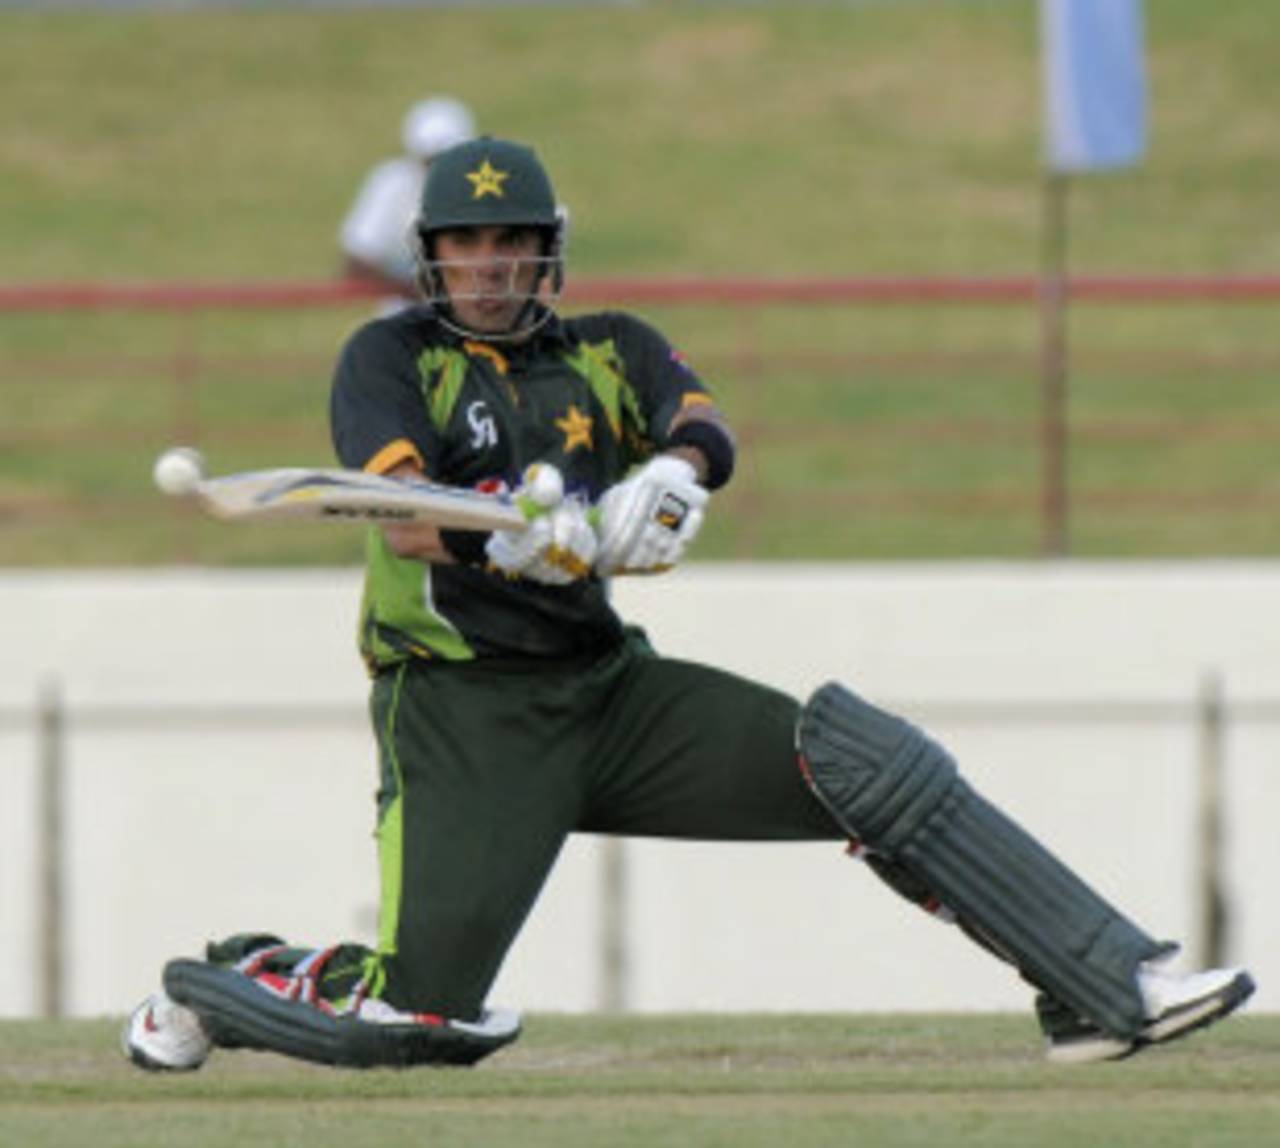 Misbah-ul-Haq reverse sweeps the ball, West Indies v Pakistan, 4th ODI, St Lucia, July 21, 2013